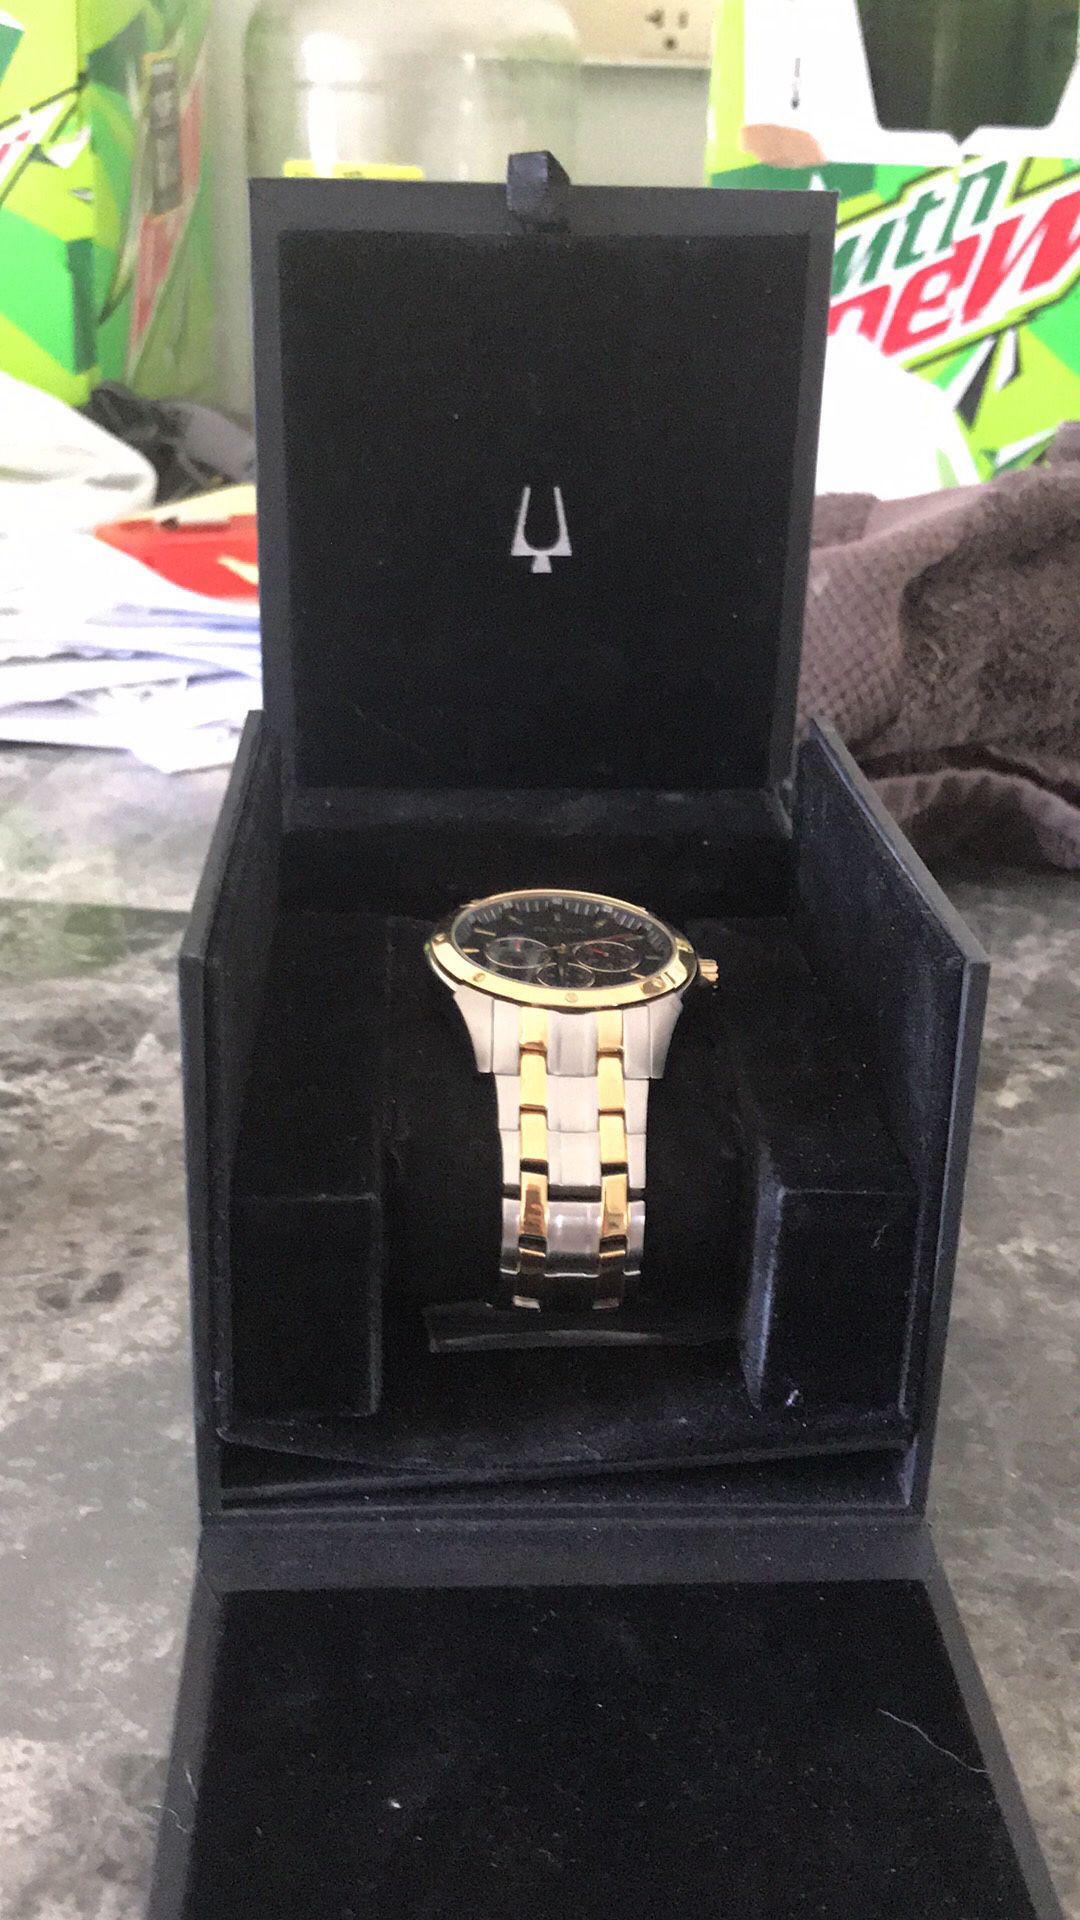 Iam selling two watches for 80 i still have the box for one of the watches iam selling one of the watches name brand is Bulova the outher is caravel